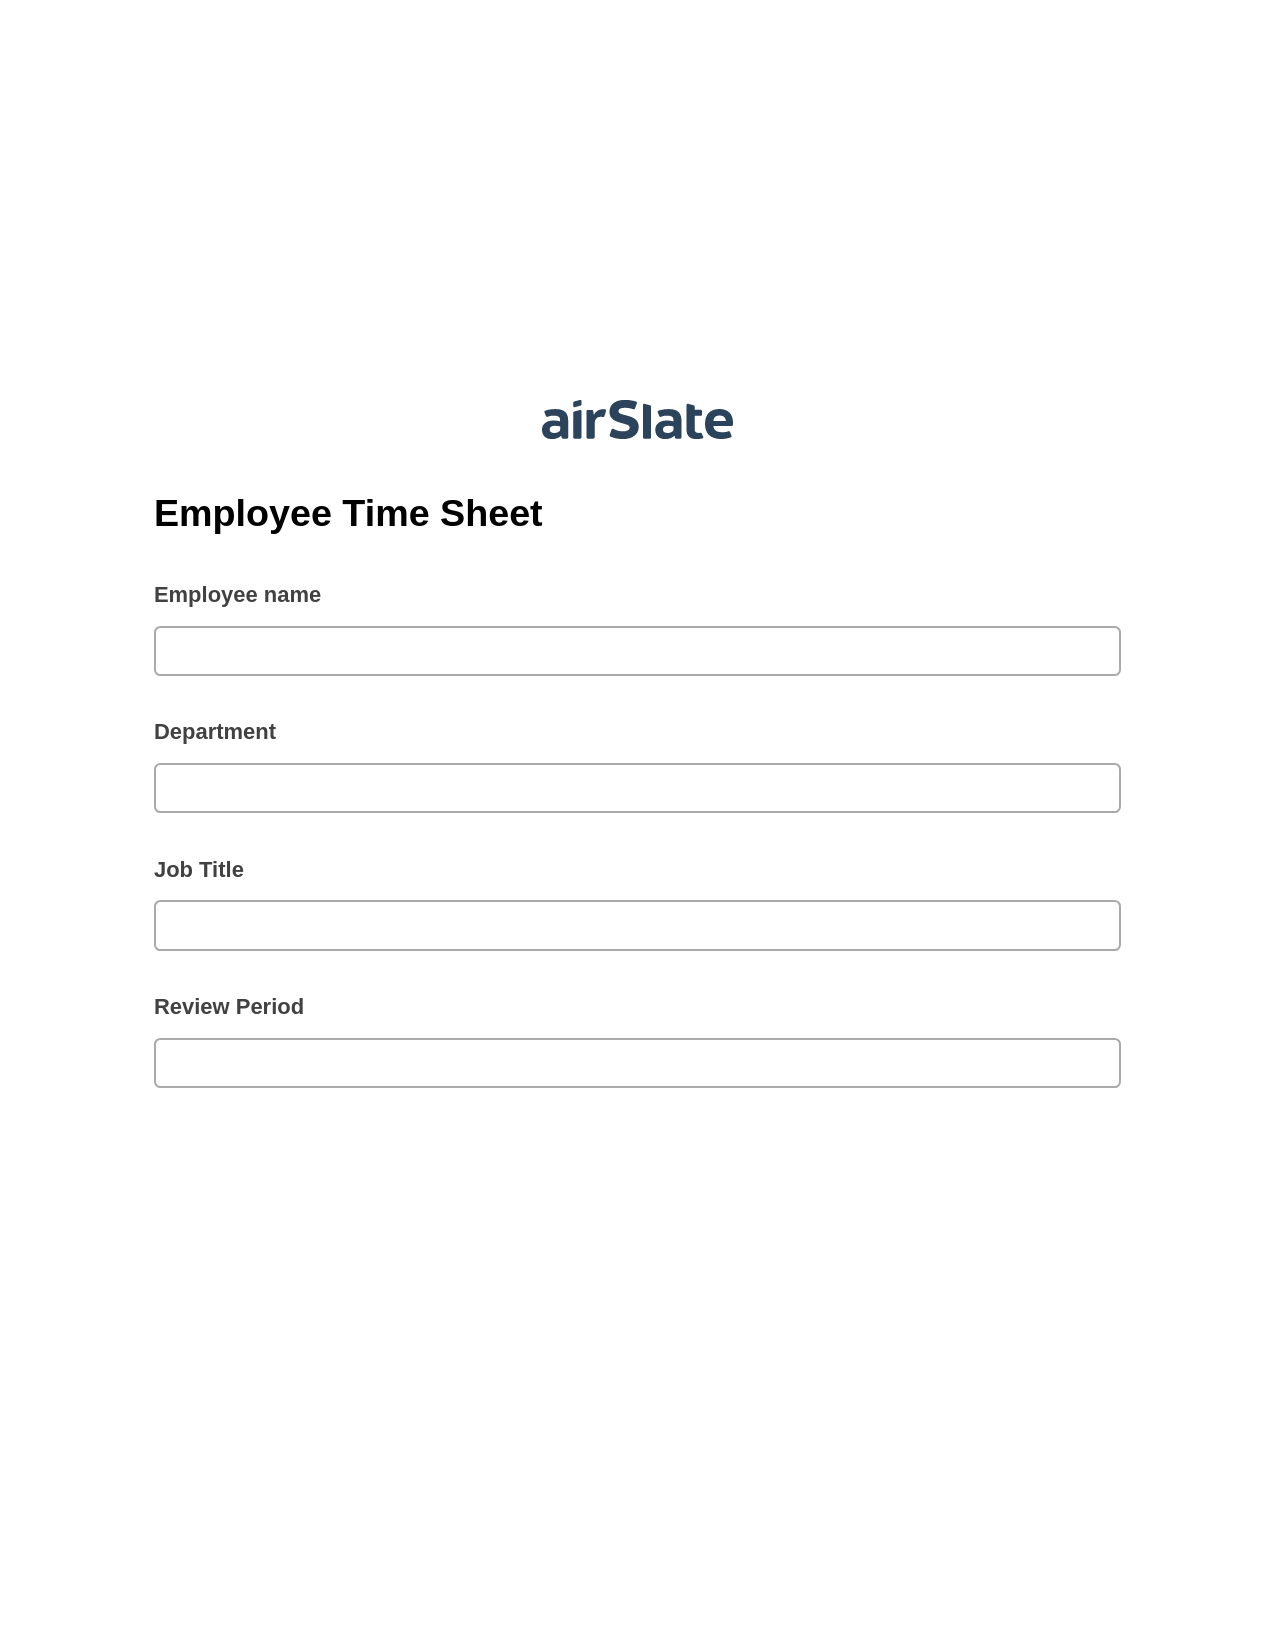 Multirole Employee Time Sheet Pre-fill from Litmos bot, Create slate addon, Export to Excel 365 Bot